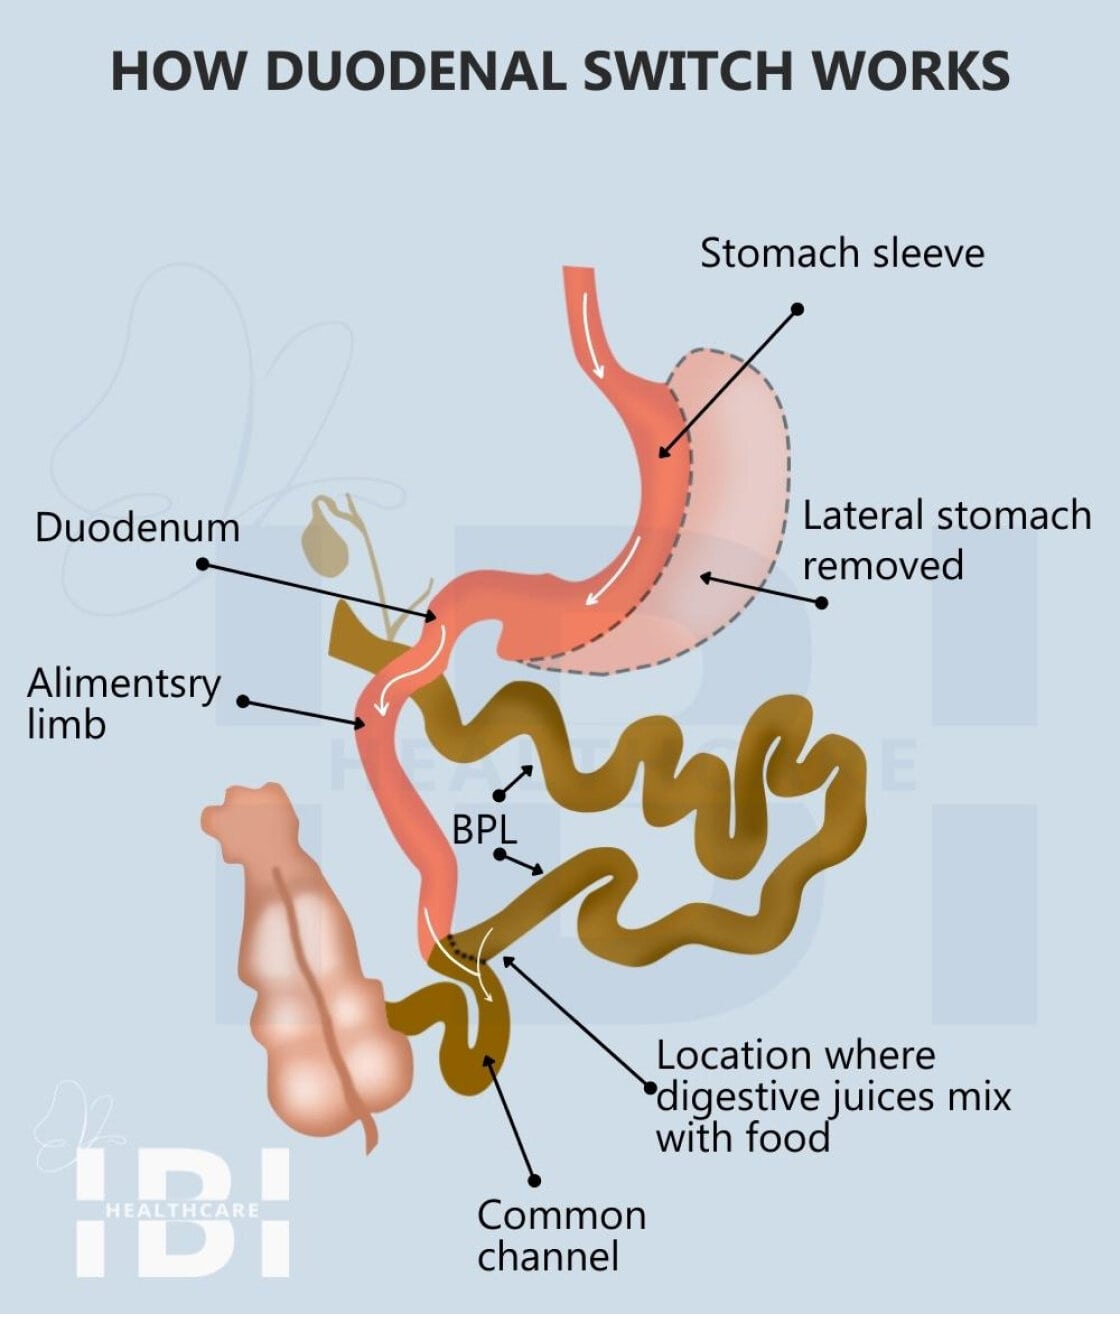 Illustration: How duodenal switch surgery